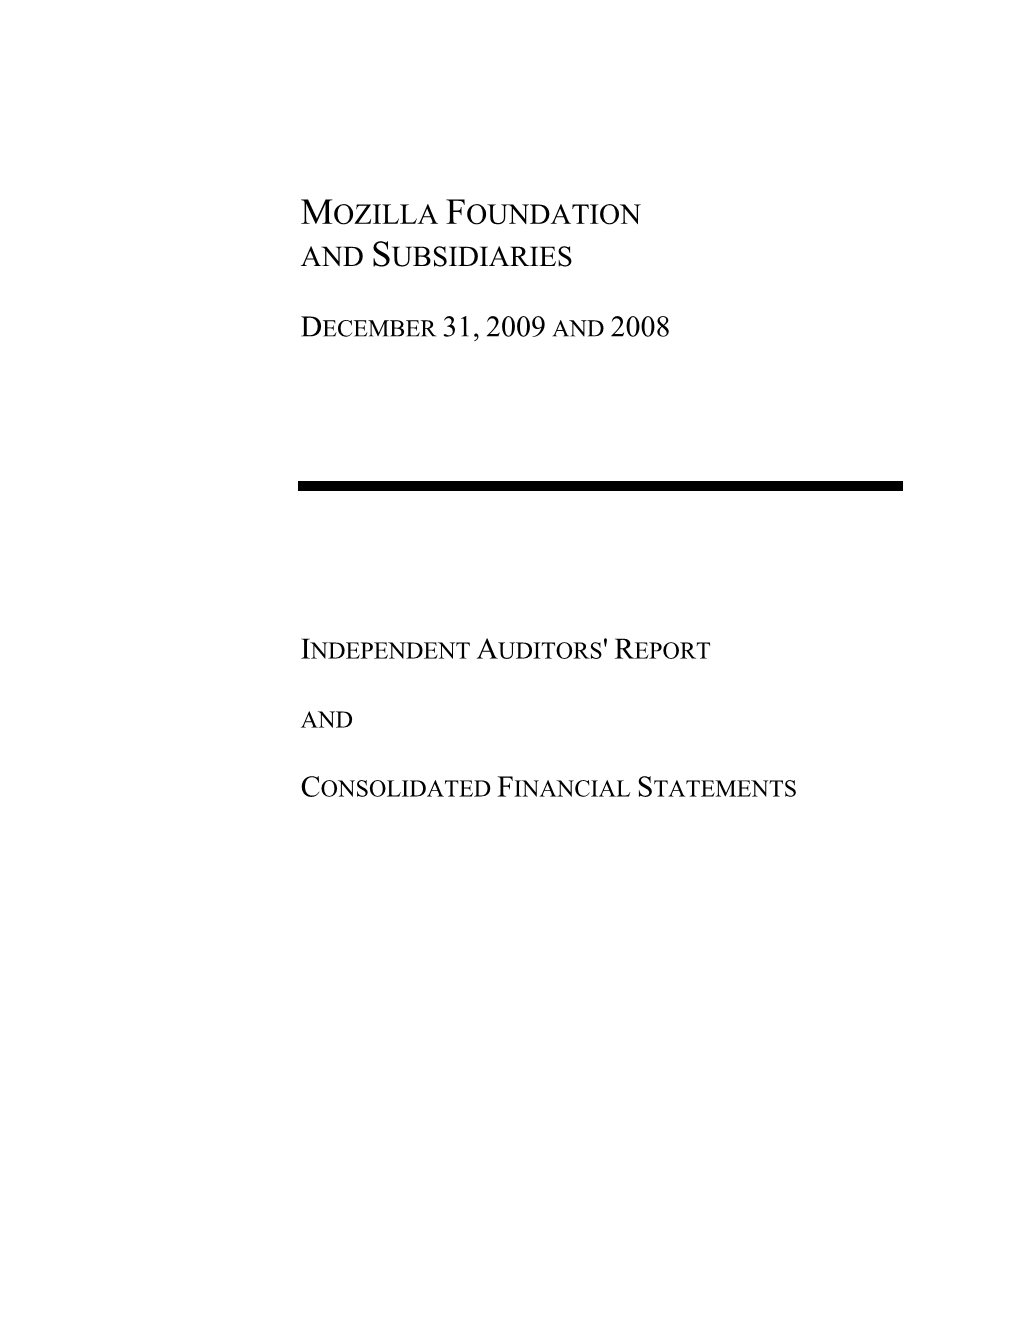 2009 Audited Financial Statement for the Mozilla Foundation